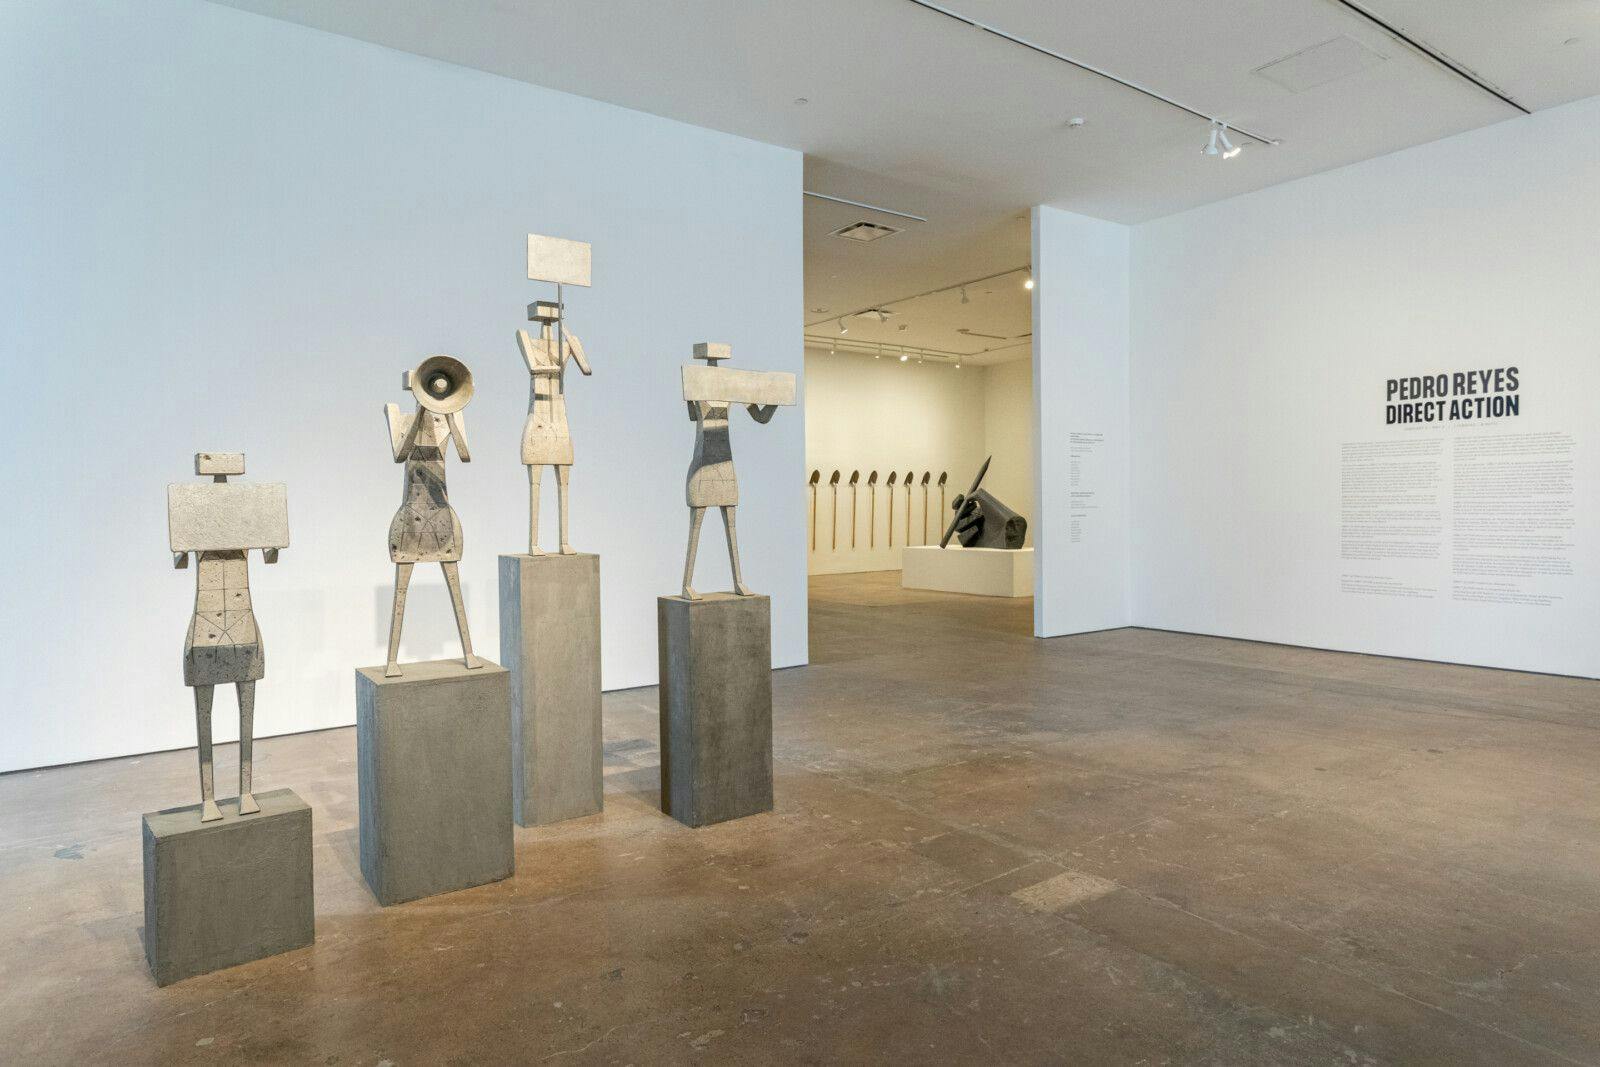 Pedro Reyes, DIRECT ACTION, 2023, Installation view, image courtesy of SITE Santa Fe, photo by Shayla Blatchford-162-HDR